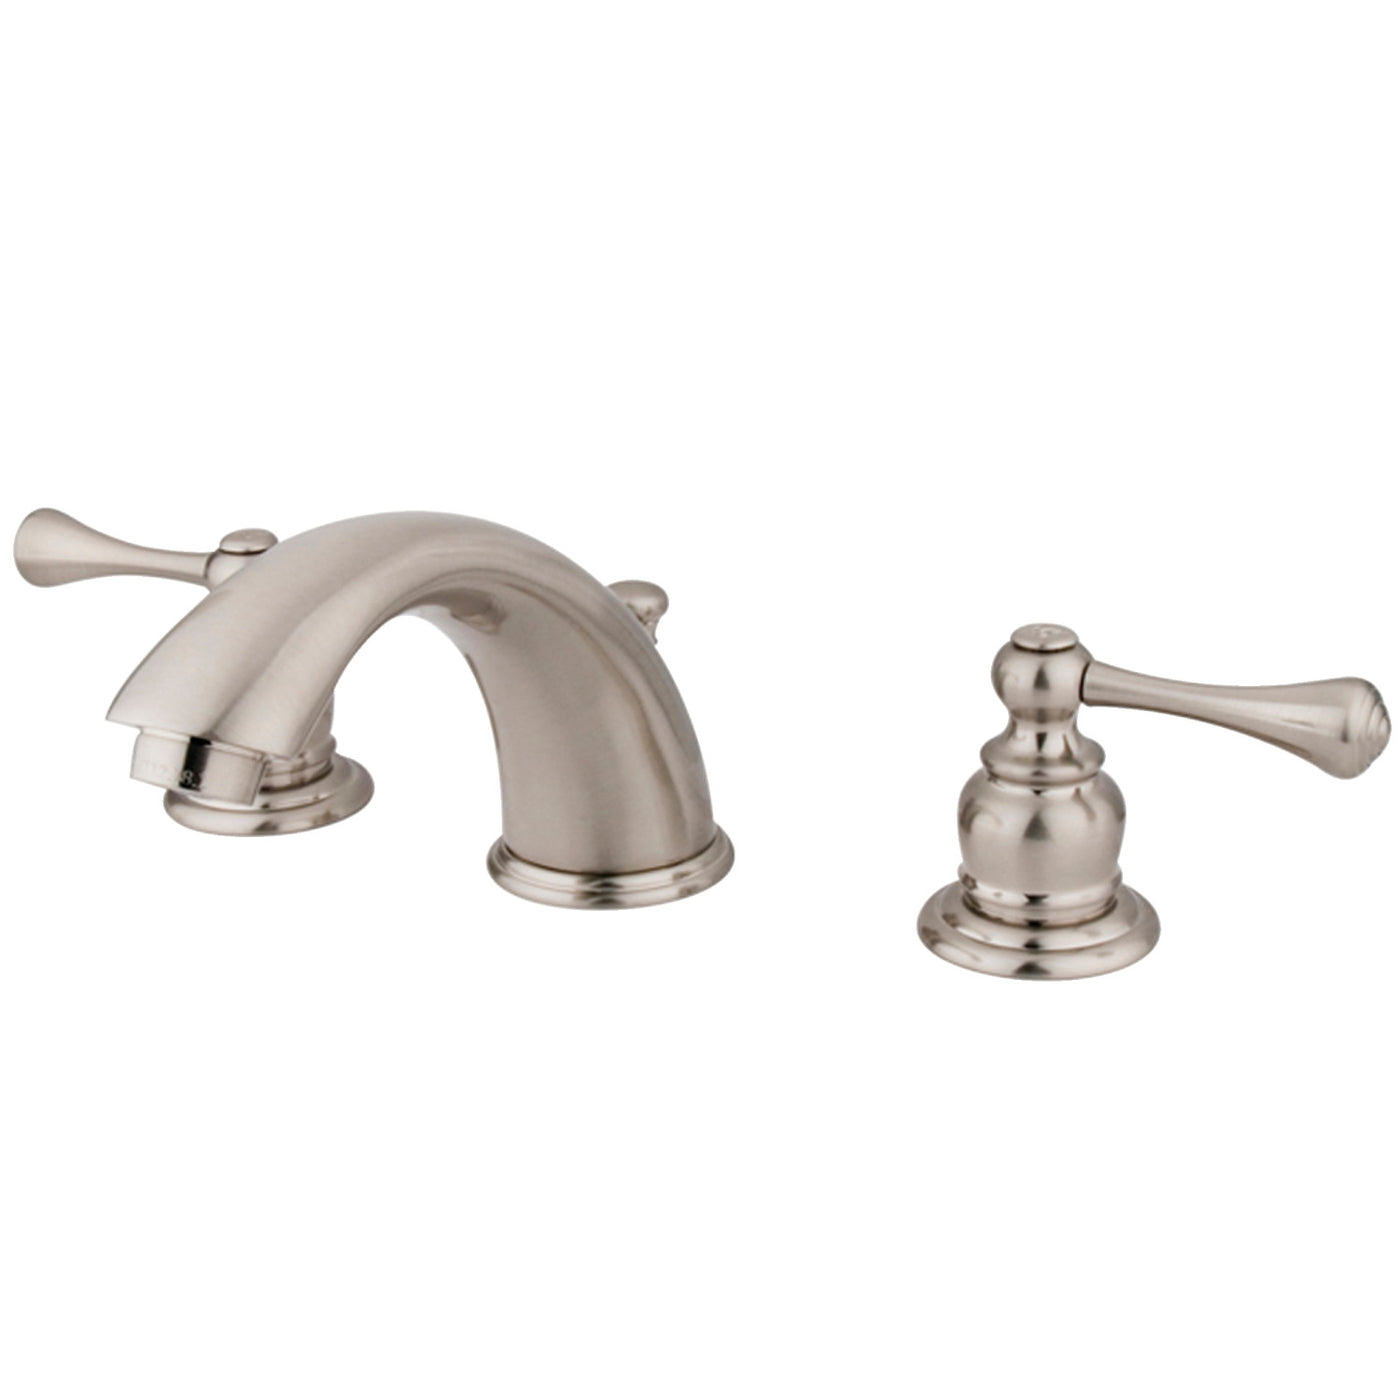 Elements of Design EB3978BL Widespread Bathroom Faucet with Retail Pop-Up, Brushed Nickel